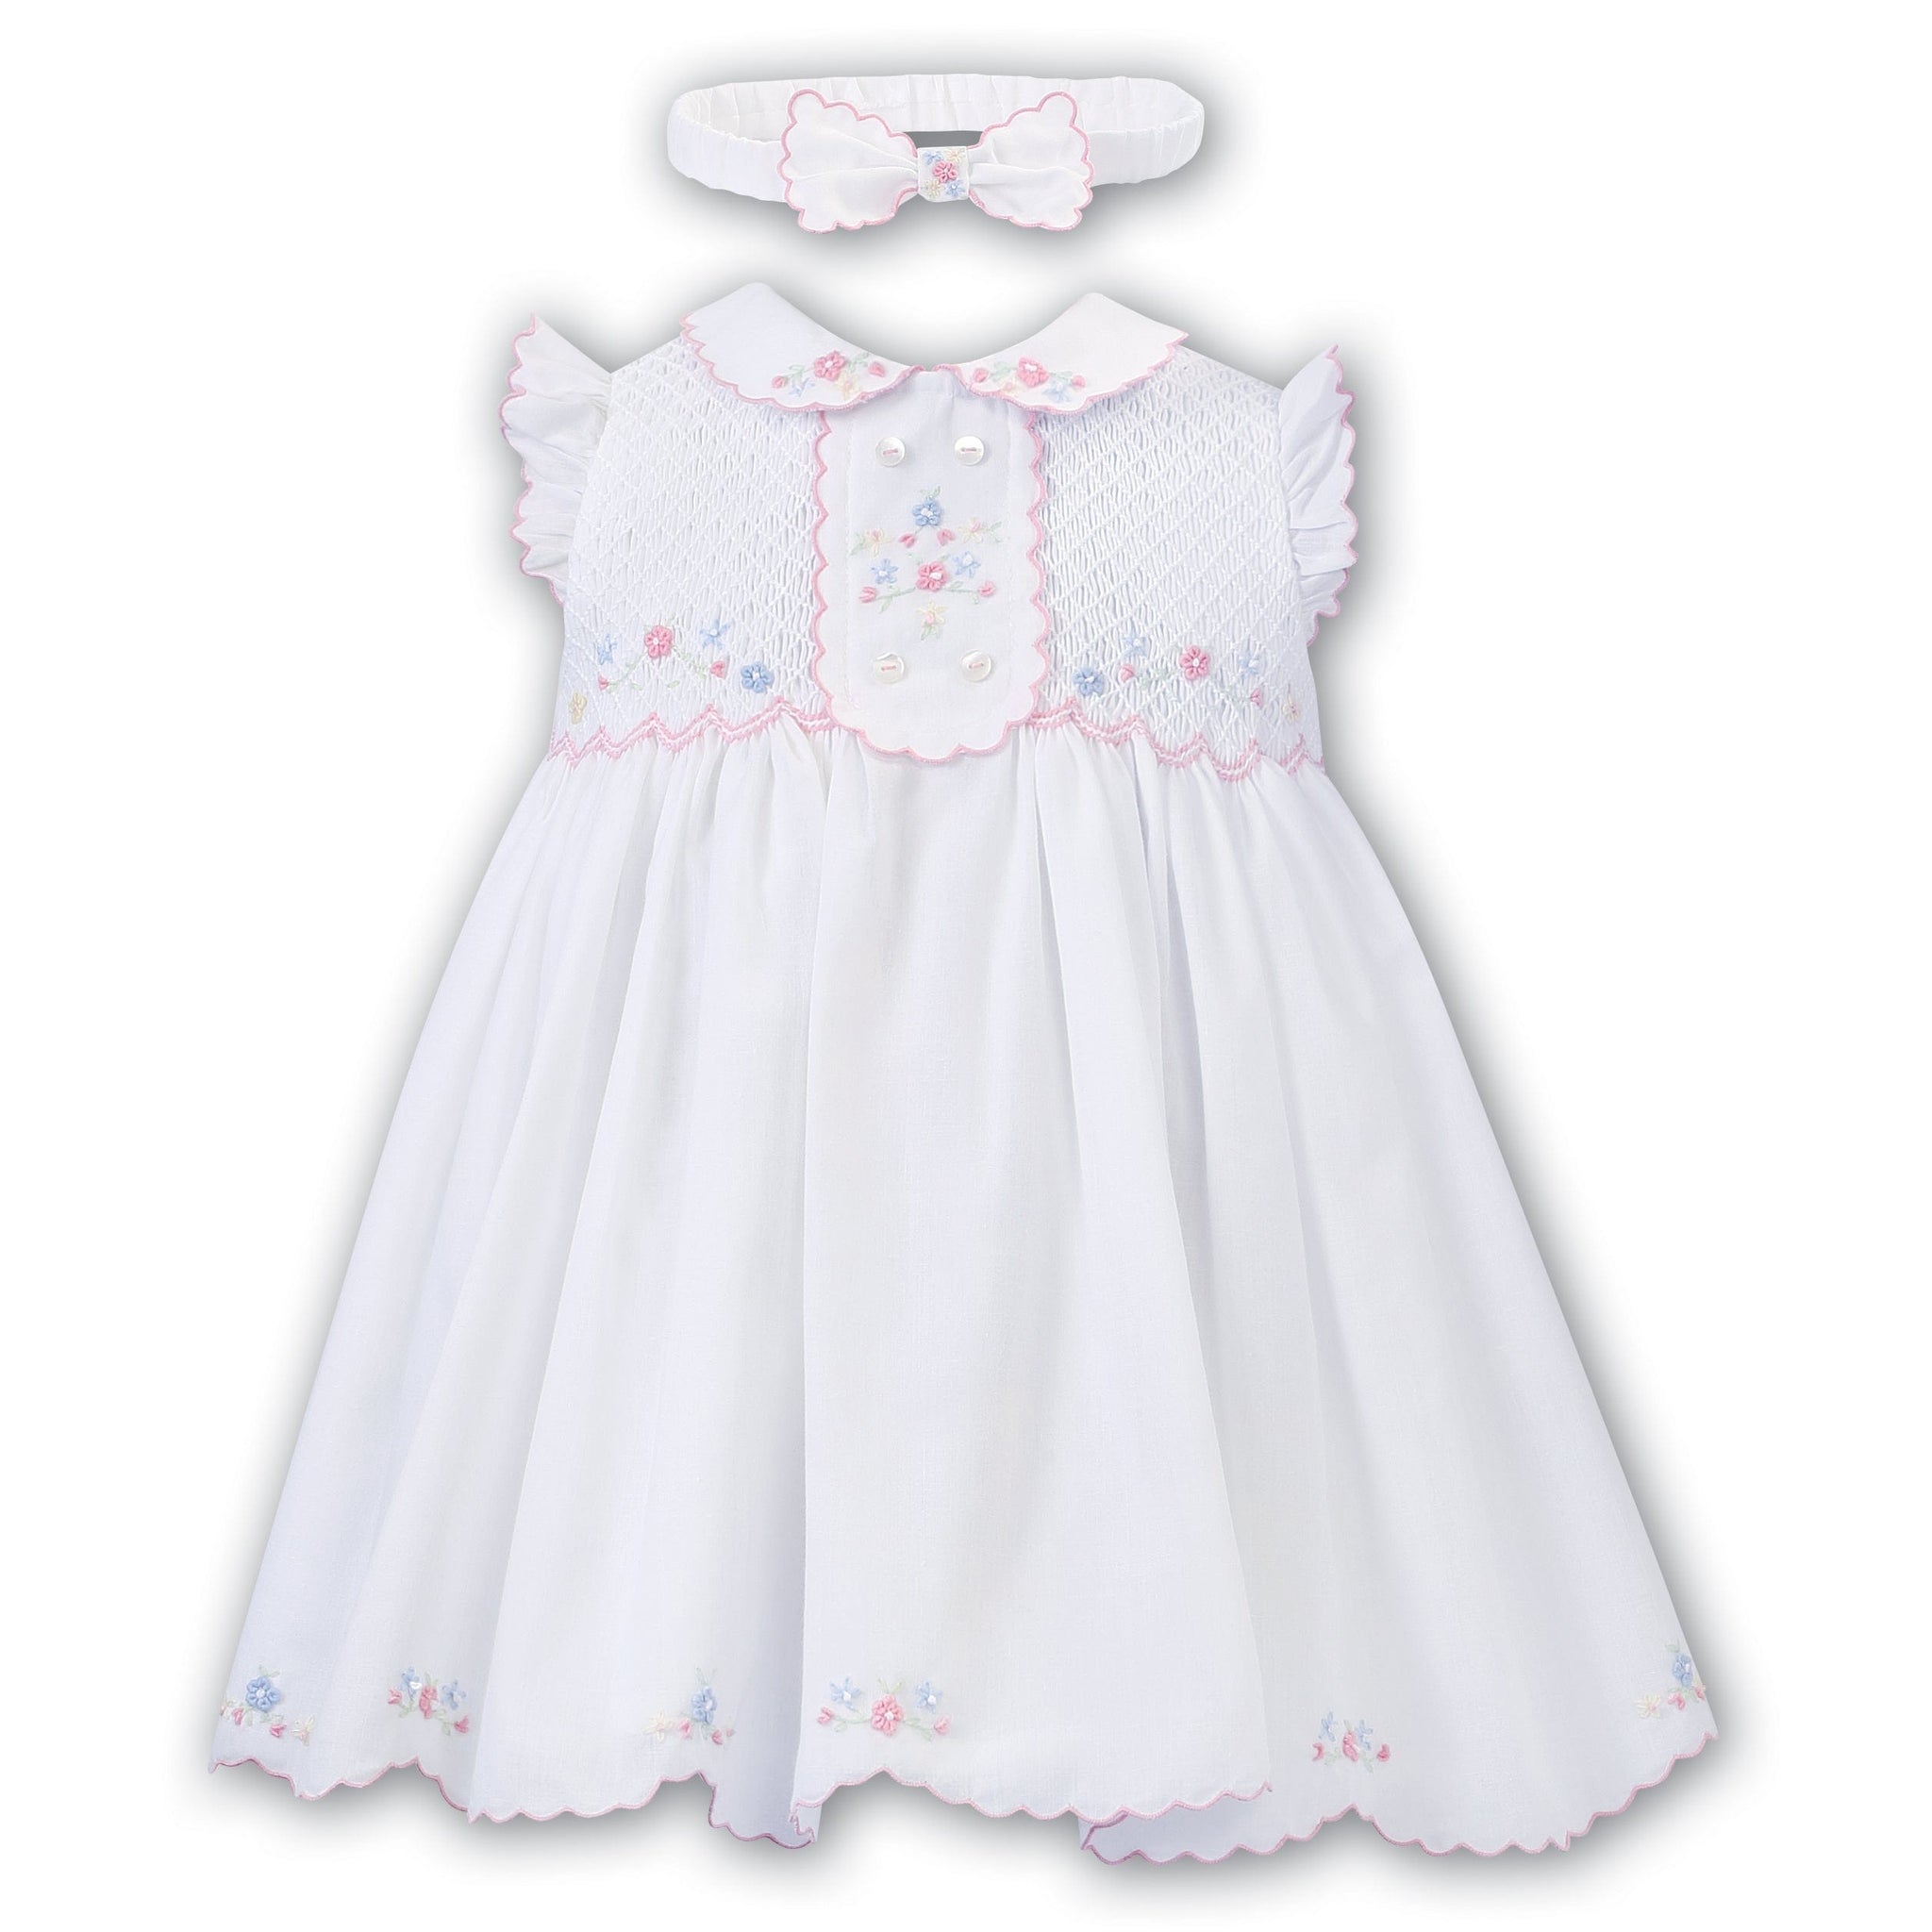 Sarah Louise Dress 6M Sarah Louise Girls Dress & Headband White With Pink Floral Embroidery